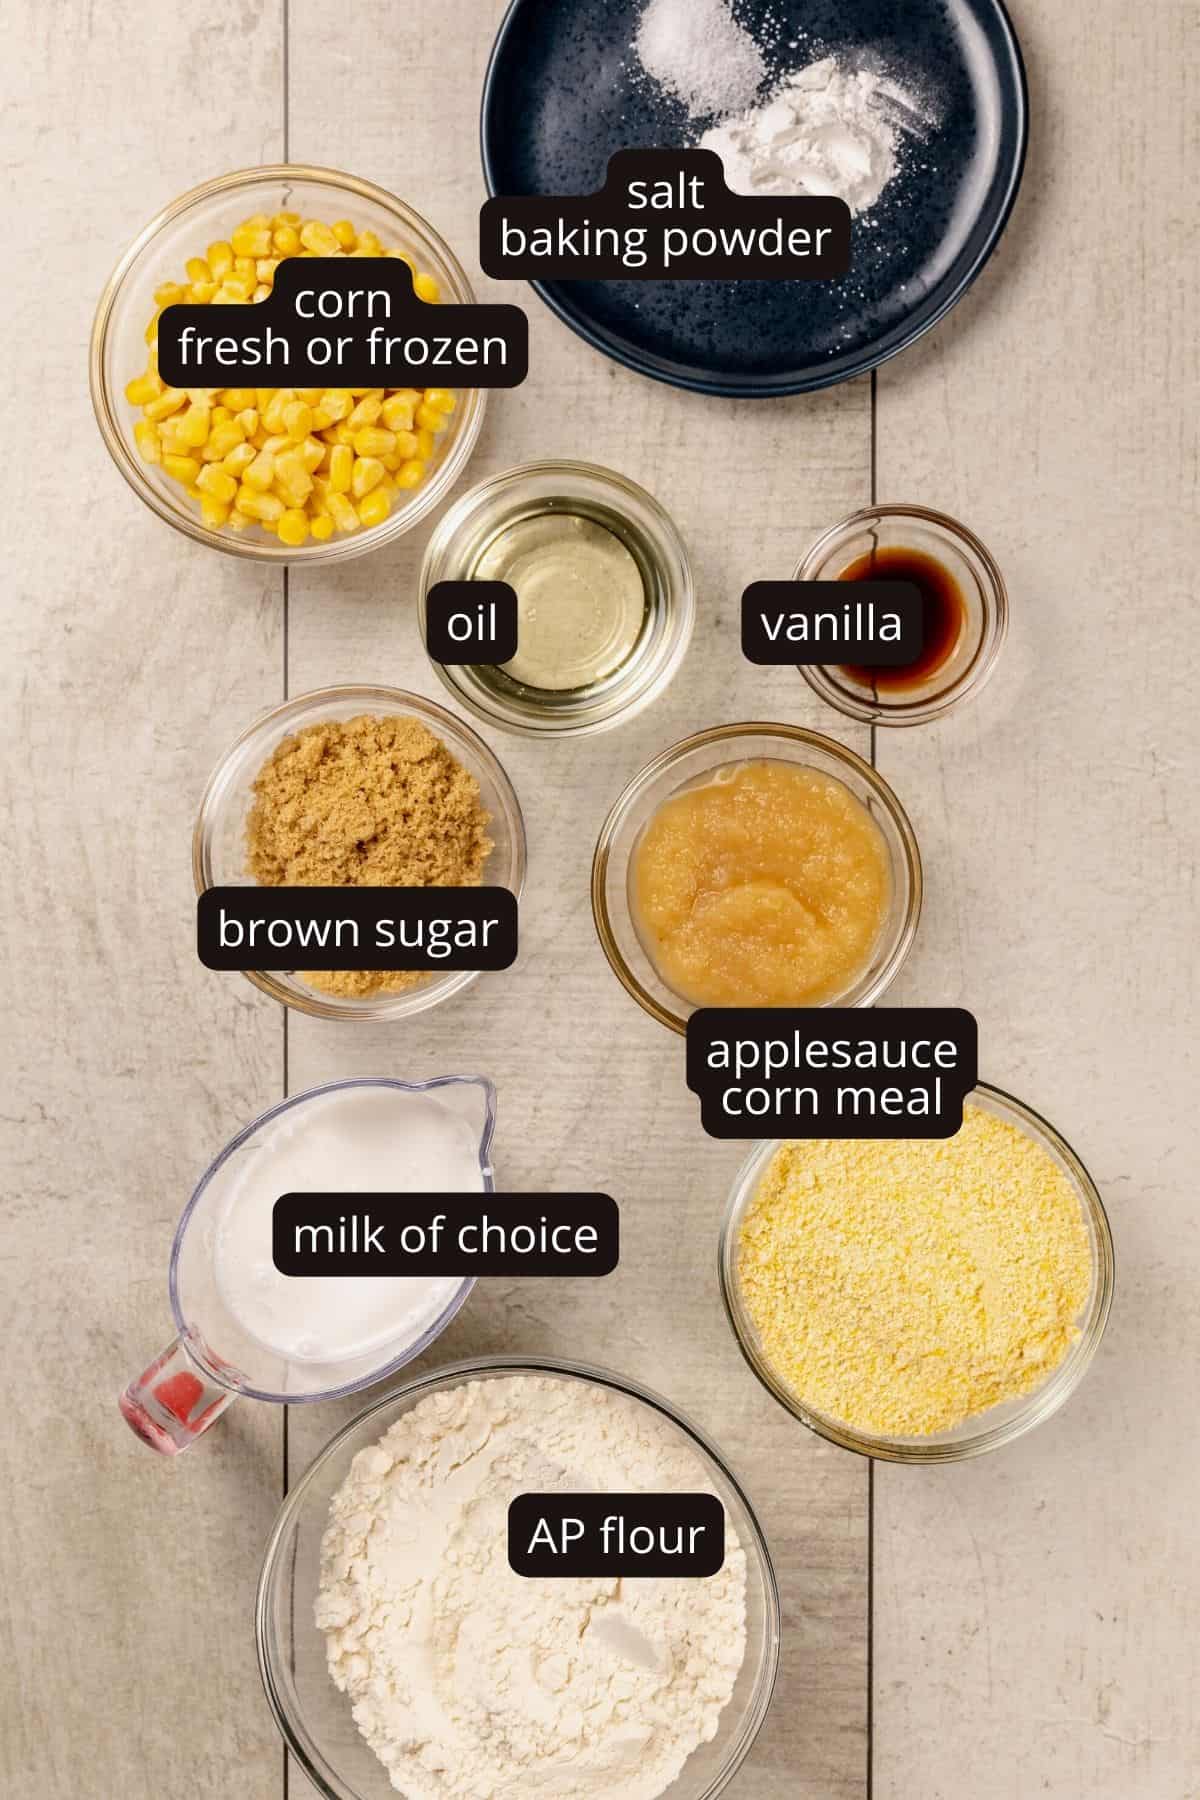 Ingredients for cornbread muffins in various glass bowls on a white wood kitchen table. Black and white labels have been added to name each ingredient.